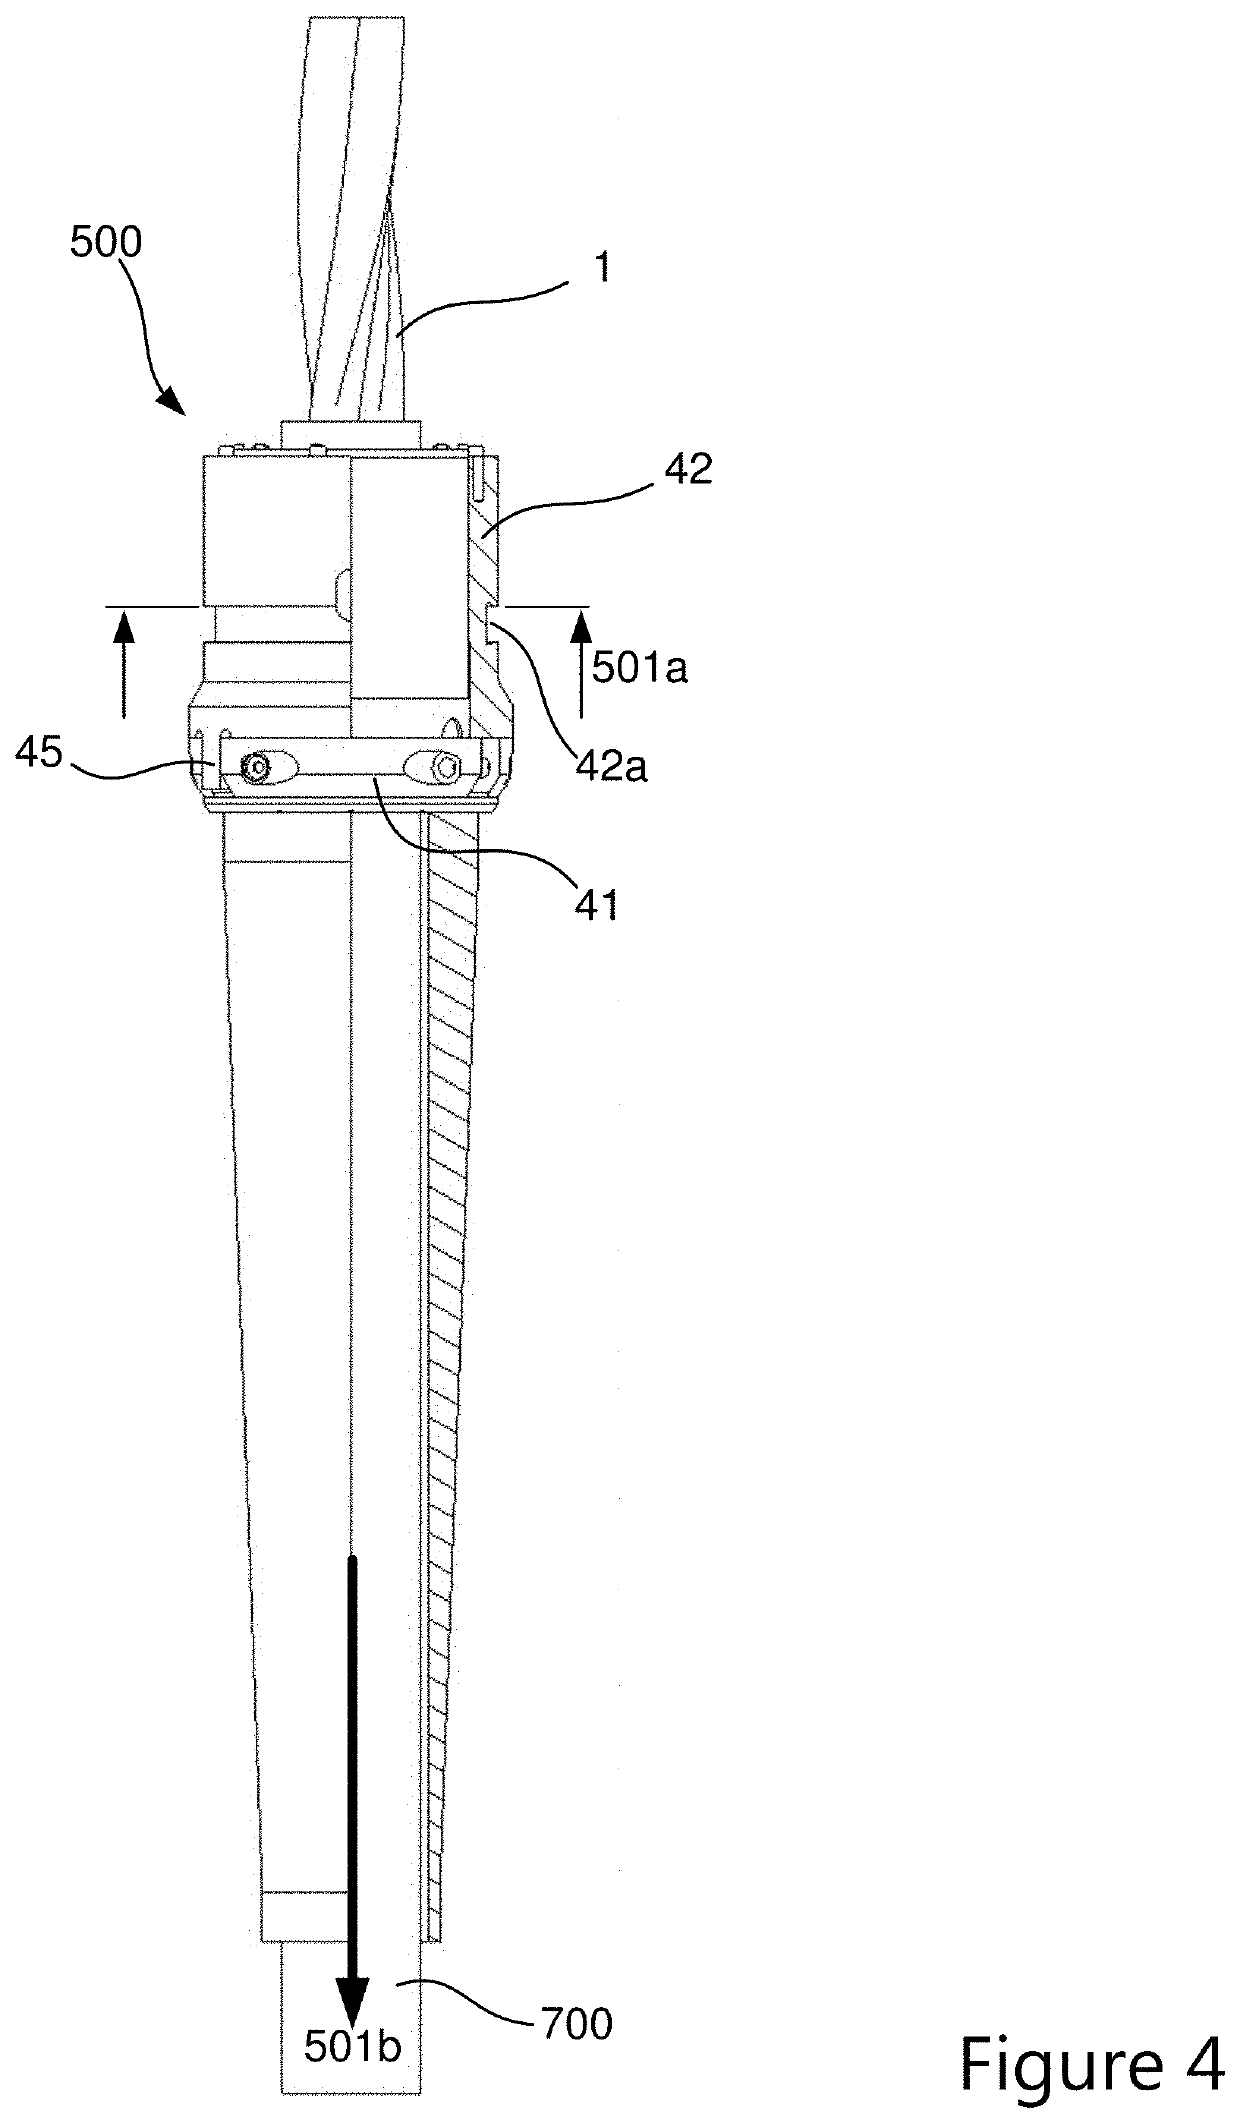 Cable release device